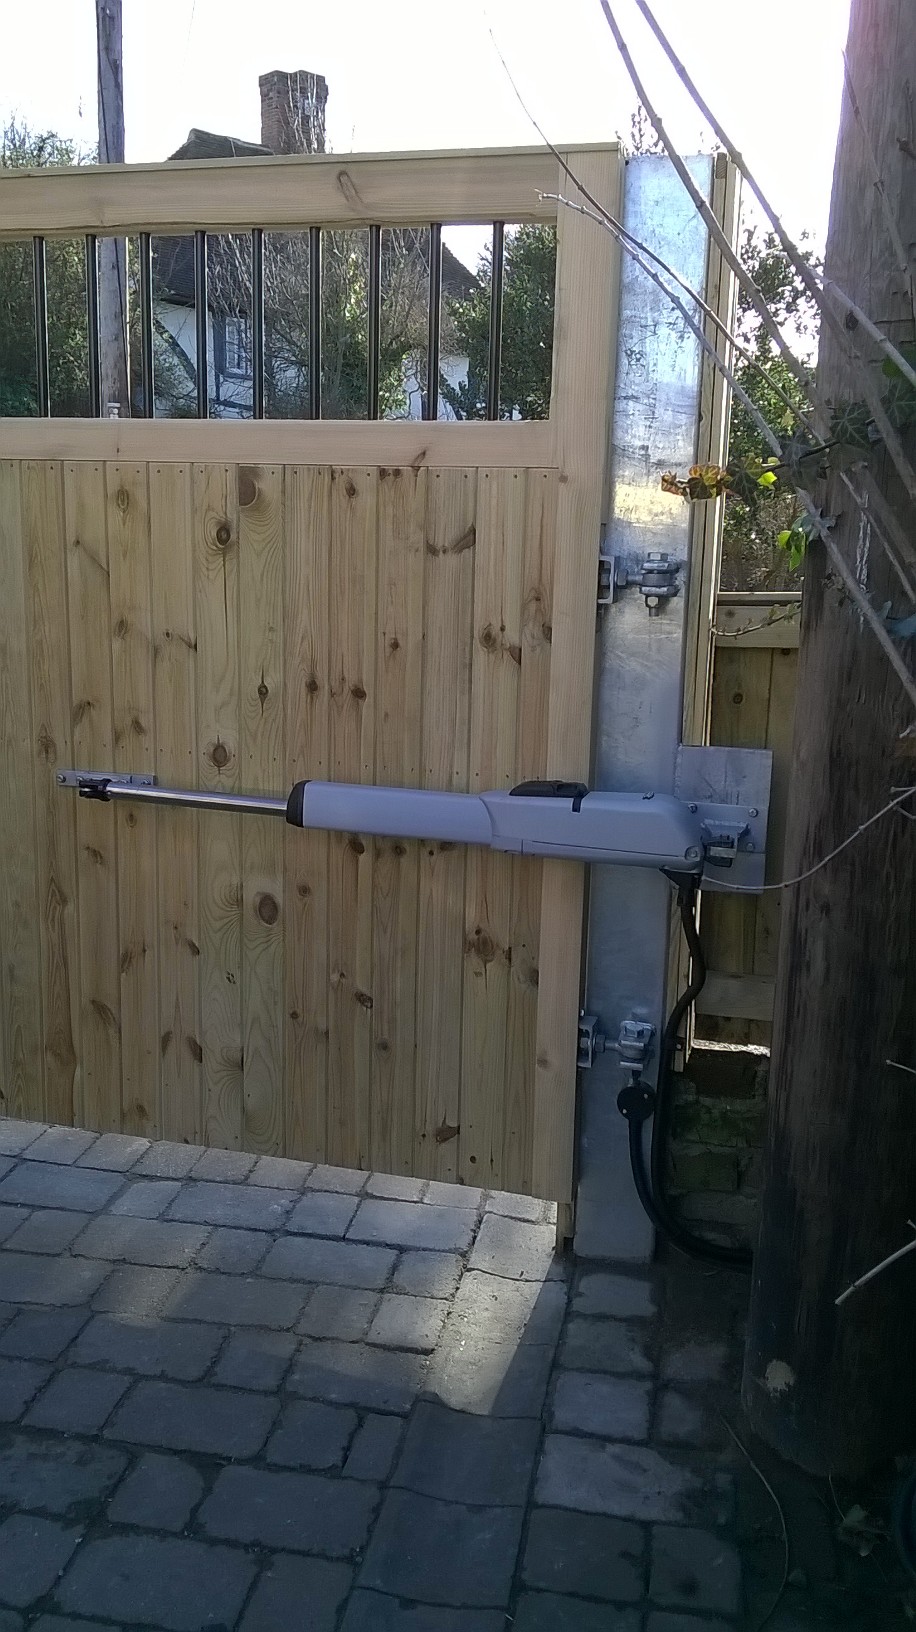 ram arm automation for the metal inner framed gates